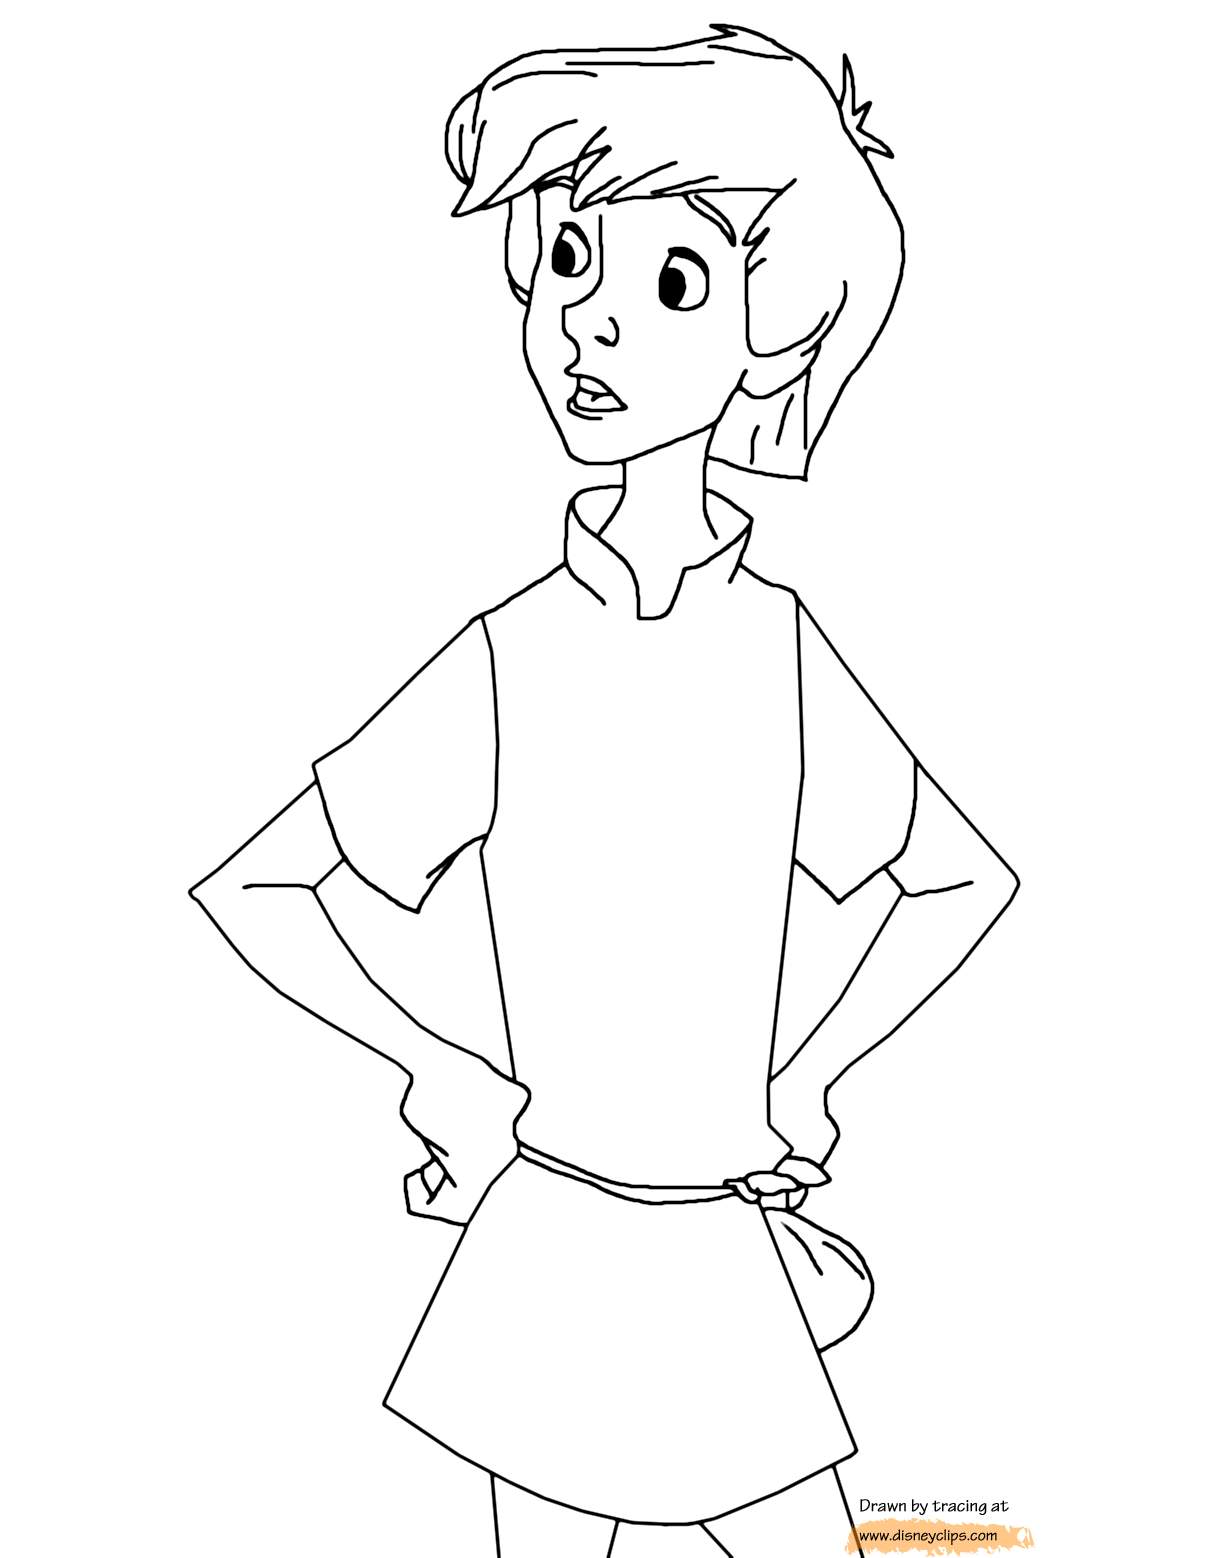 zelda sword in the stone coloring pages - photo #24